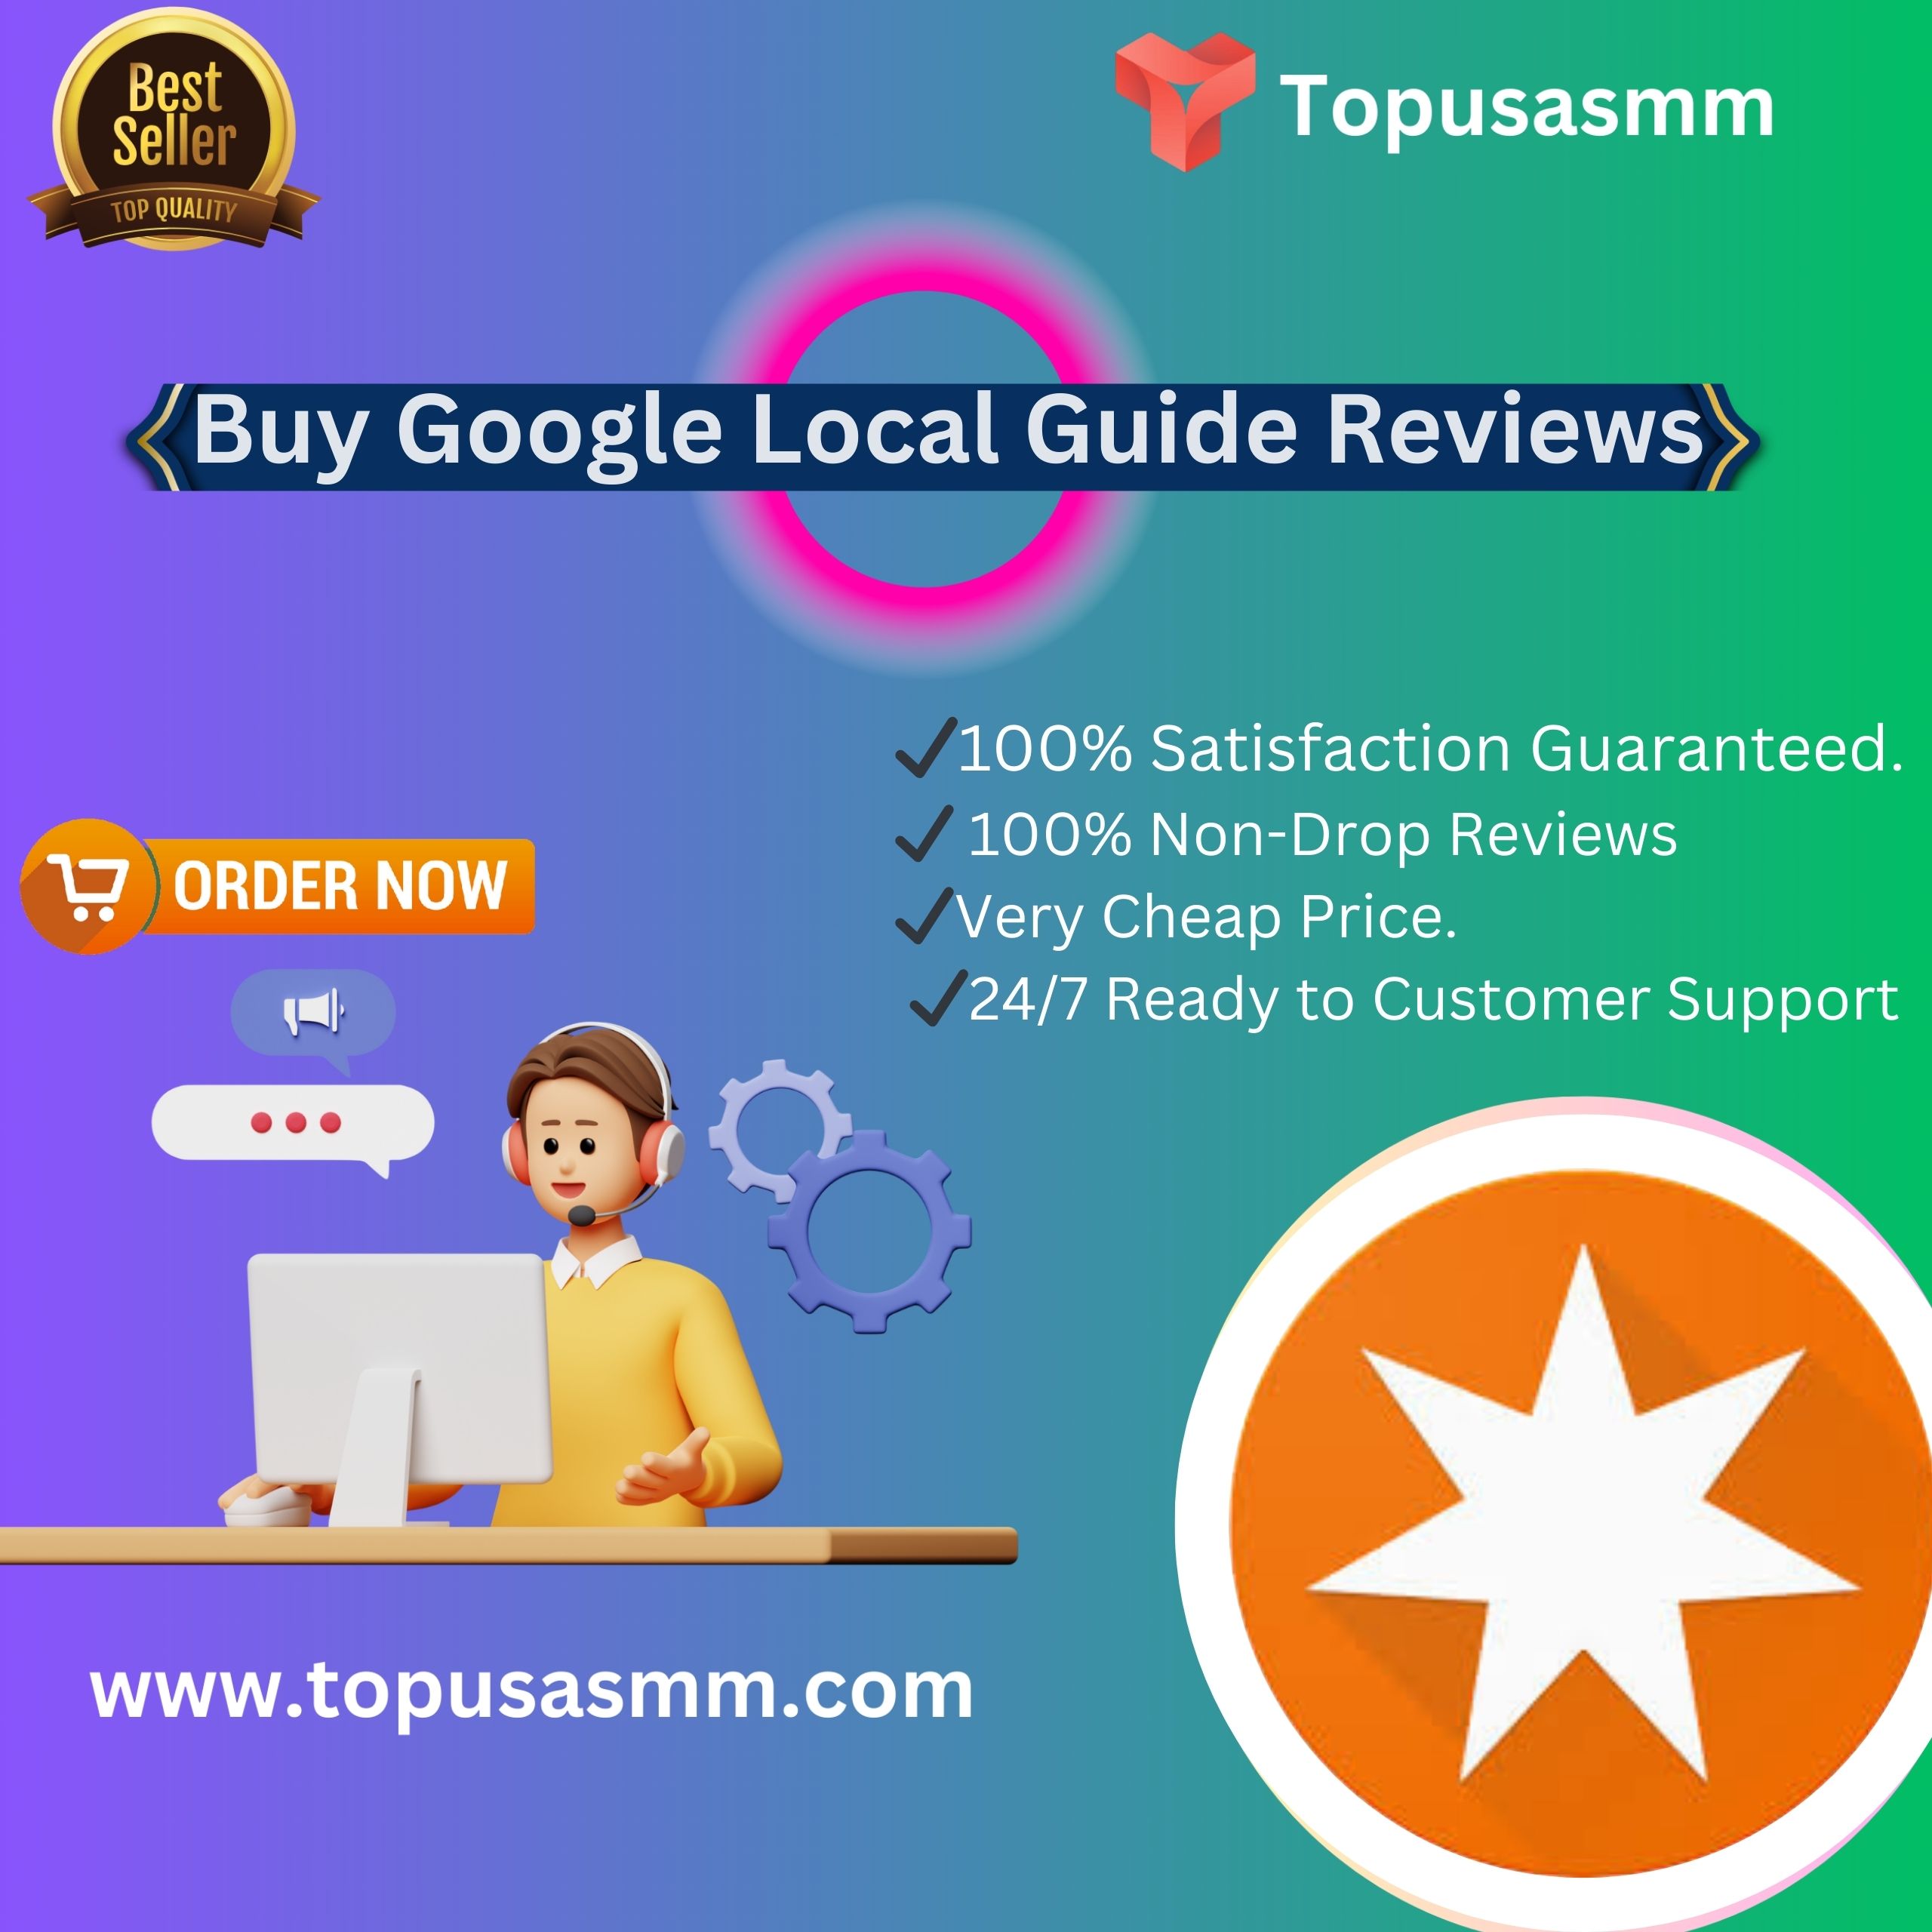 Buy Google Local Guide reviews - 100% Live Local Guides Reviews